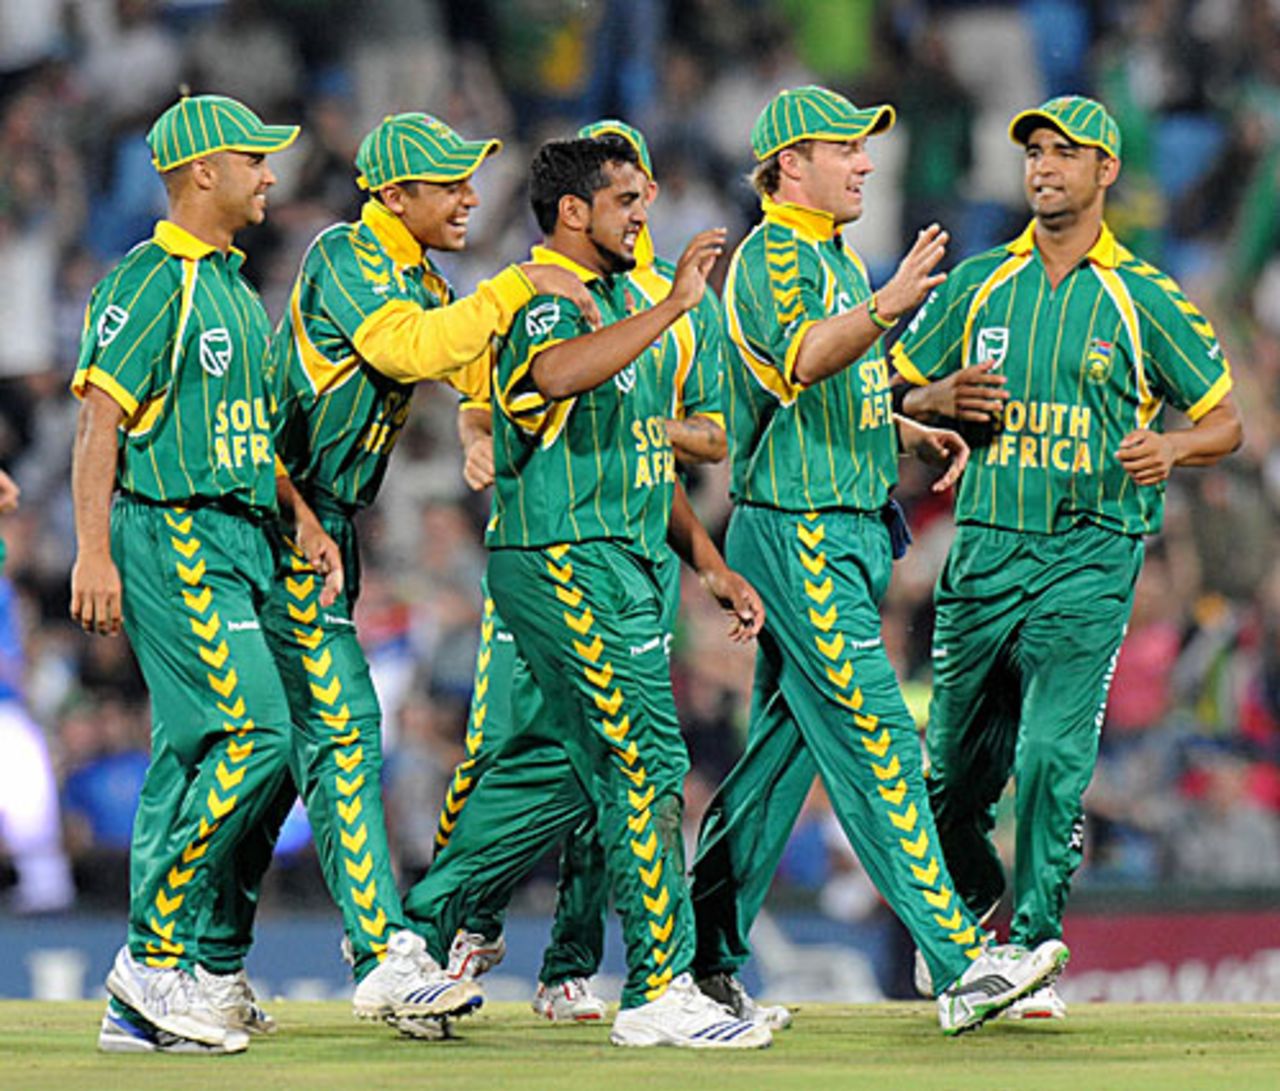 The South Africans celebrate an early strike, South Africa v Australia, 2nd Twenty20, Centurion, March 29, 2009